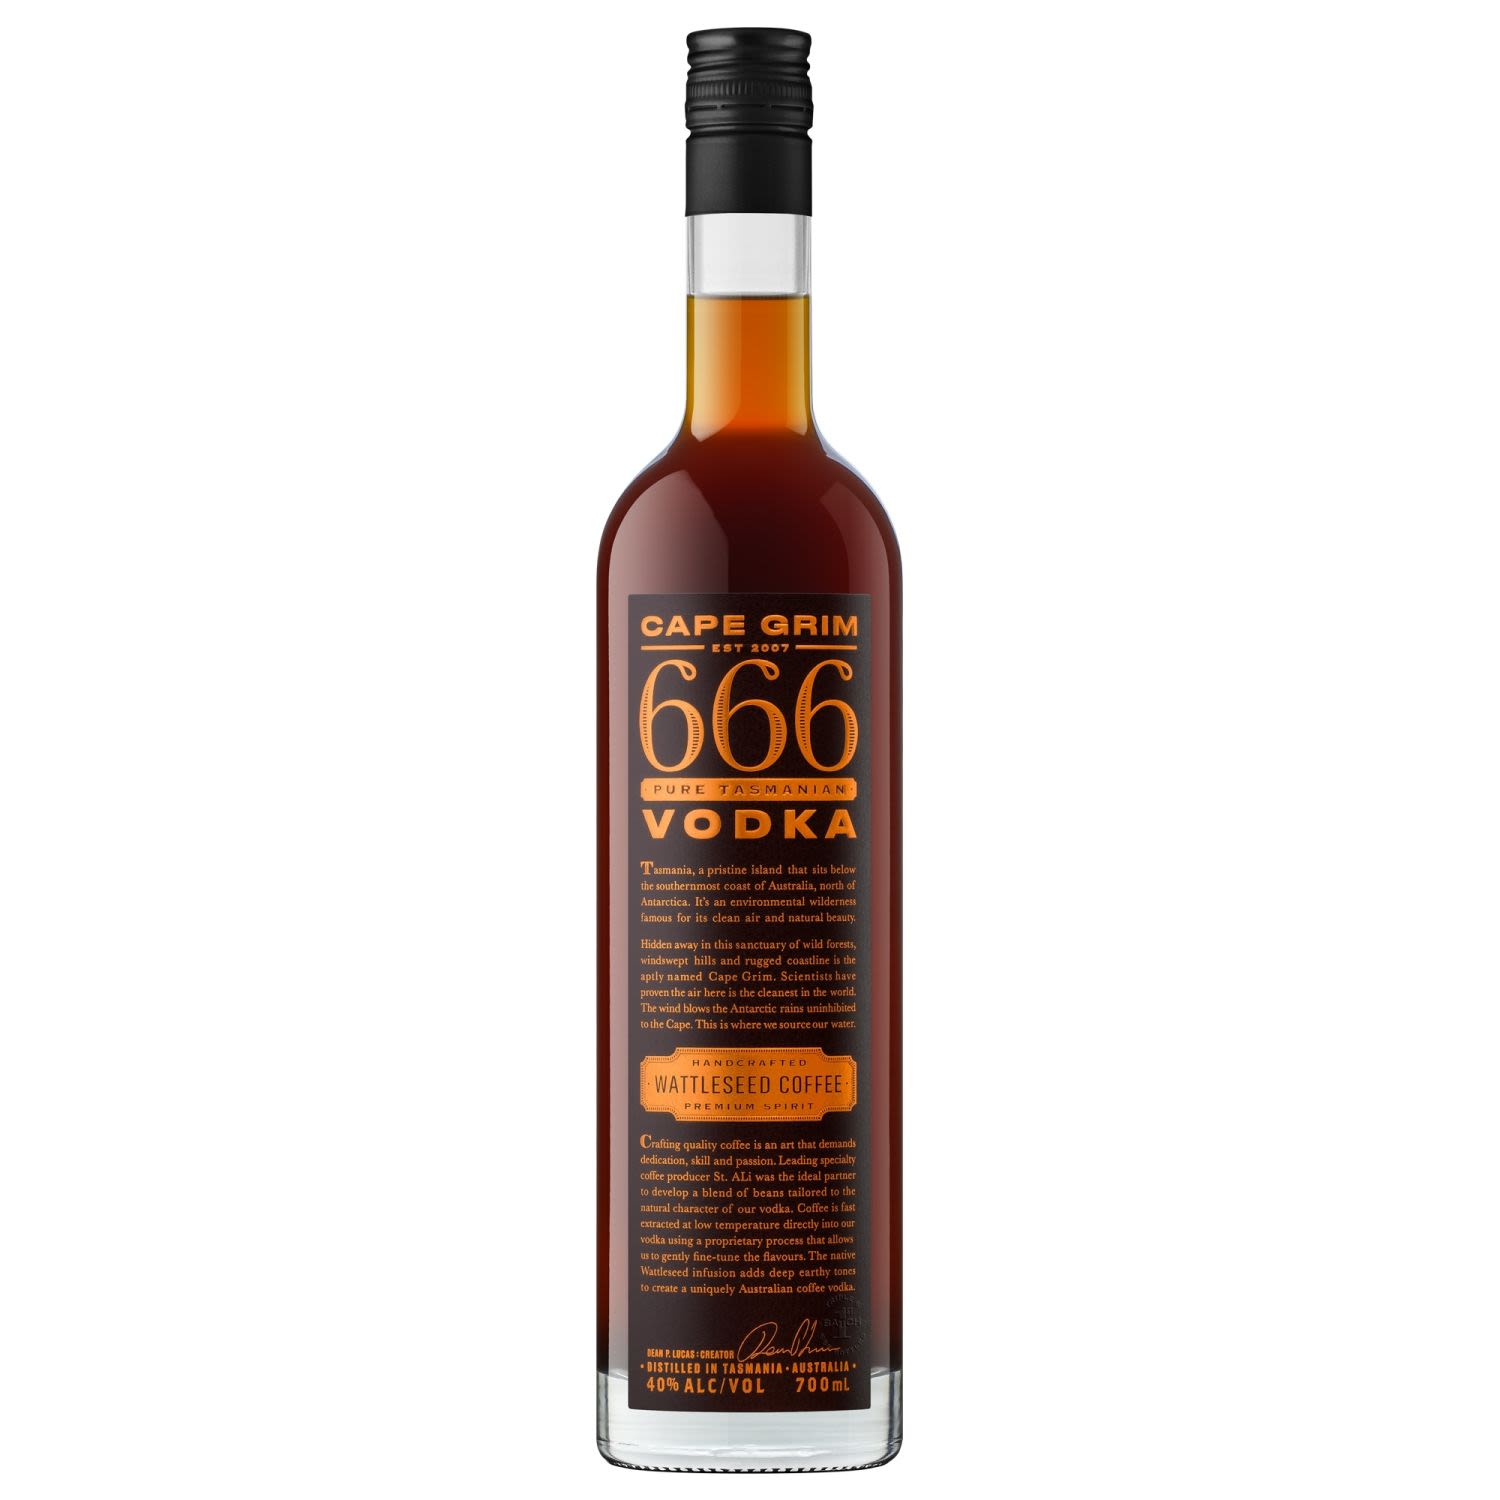 Earthy and full bodied with bittersweet, bush coffee notes, nutty wattleseed warmth, dark chocolate, salted caramel and anise subtleties.<br /> <br />Alcohol Volume: 40.00%<br /><br />Pack Format: Bottle<br /><br />Standard Drinks: 22</br /><br />Pack Type: Bottle<br /><br />Country of Origin: Australia<br />